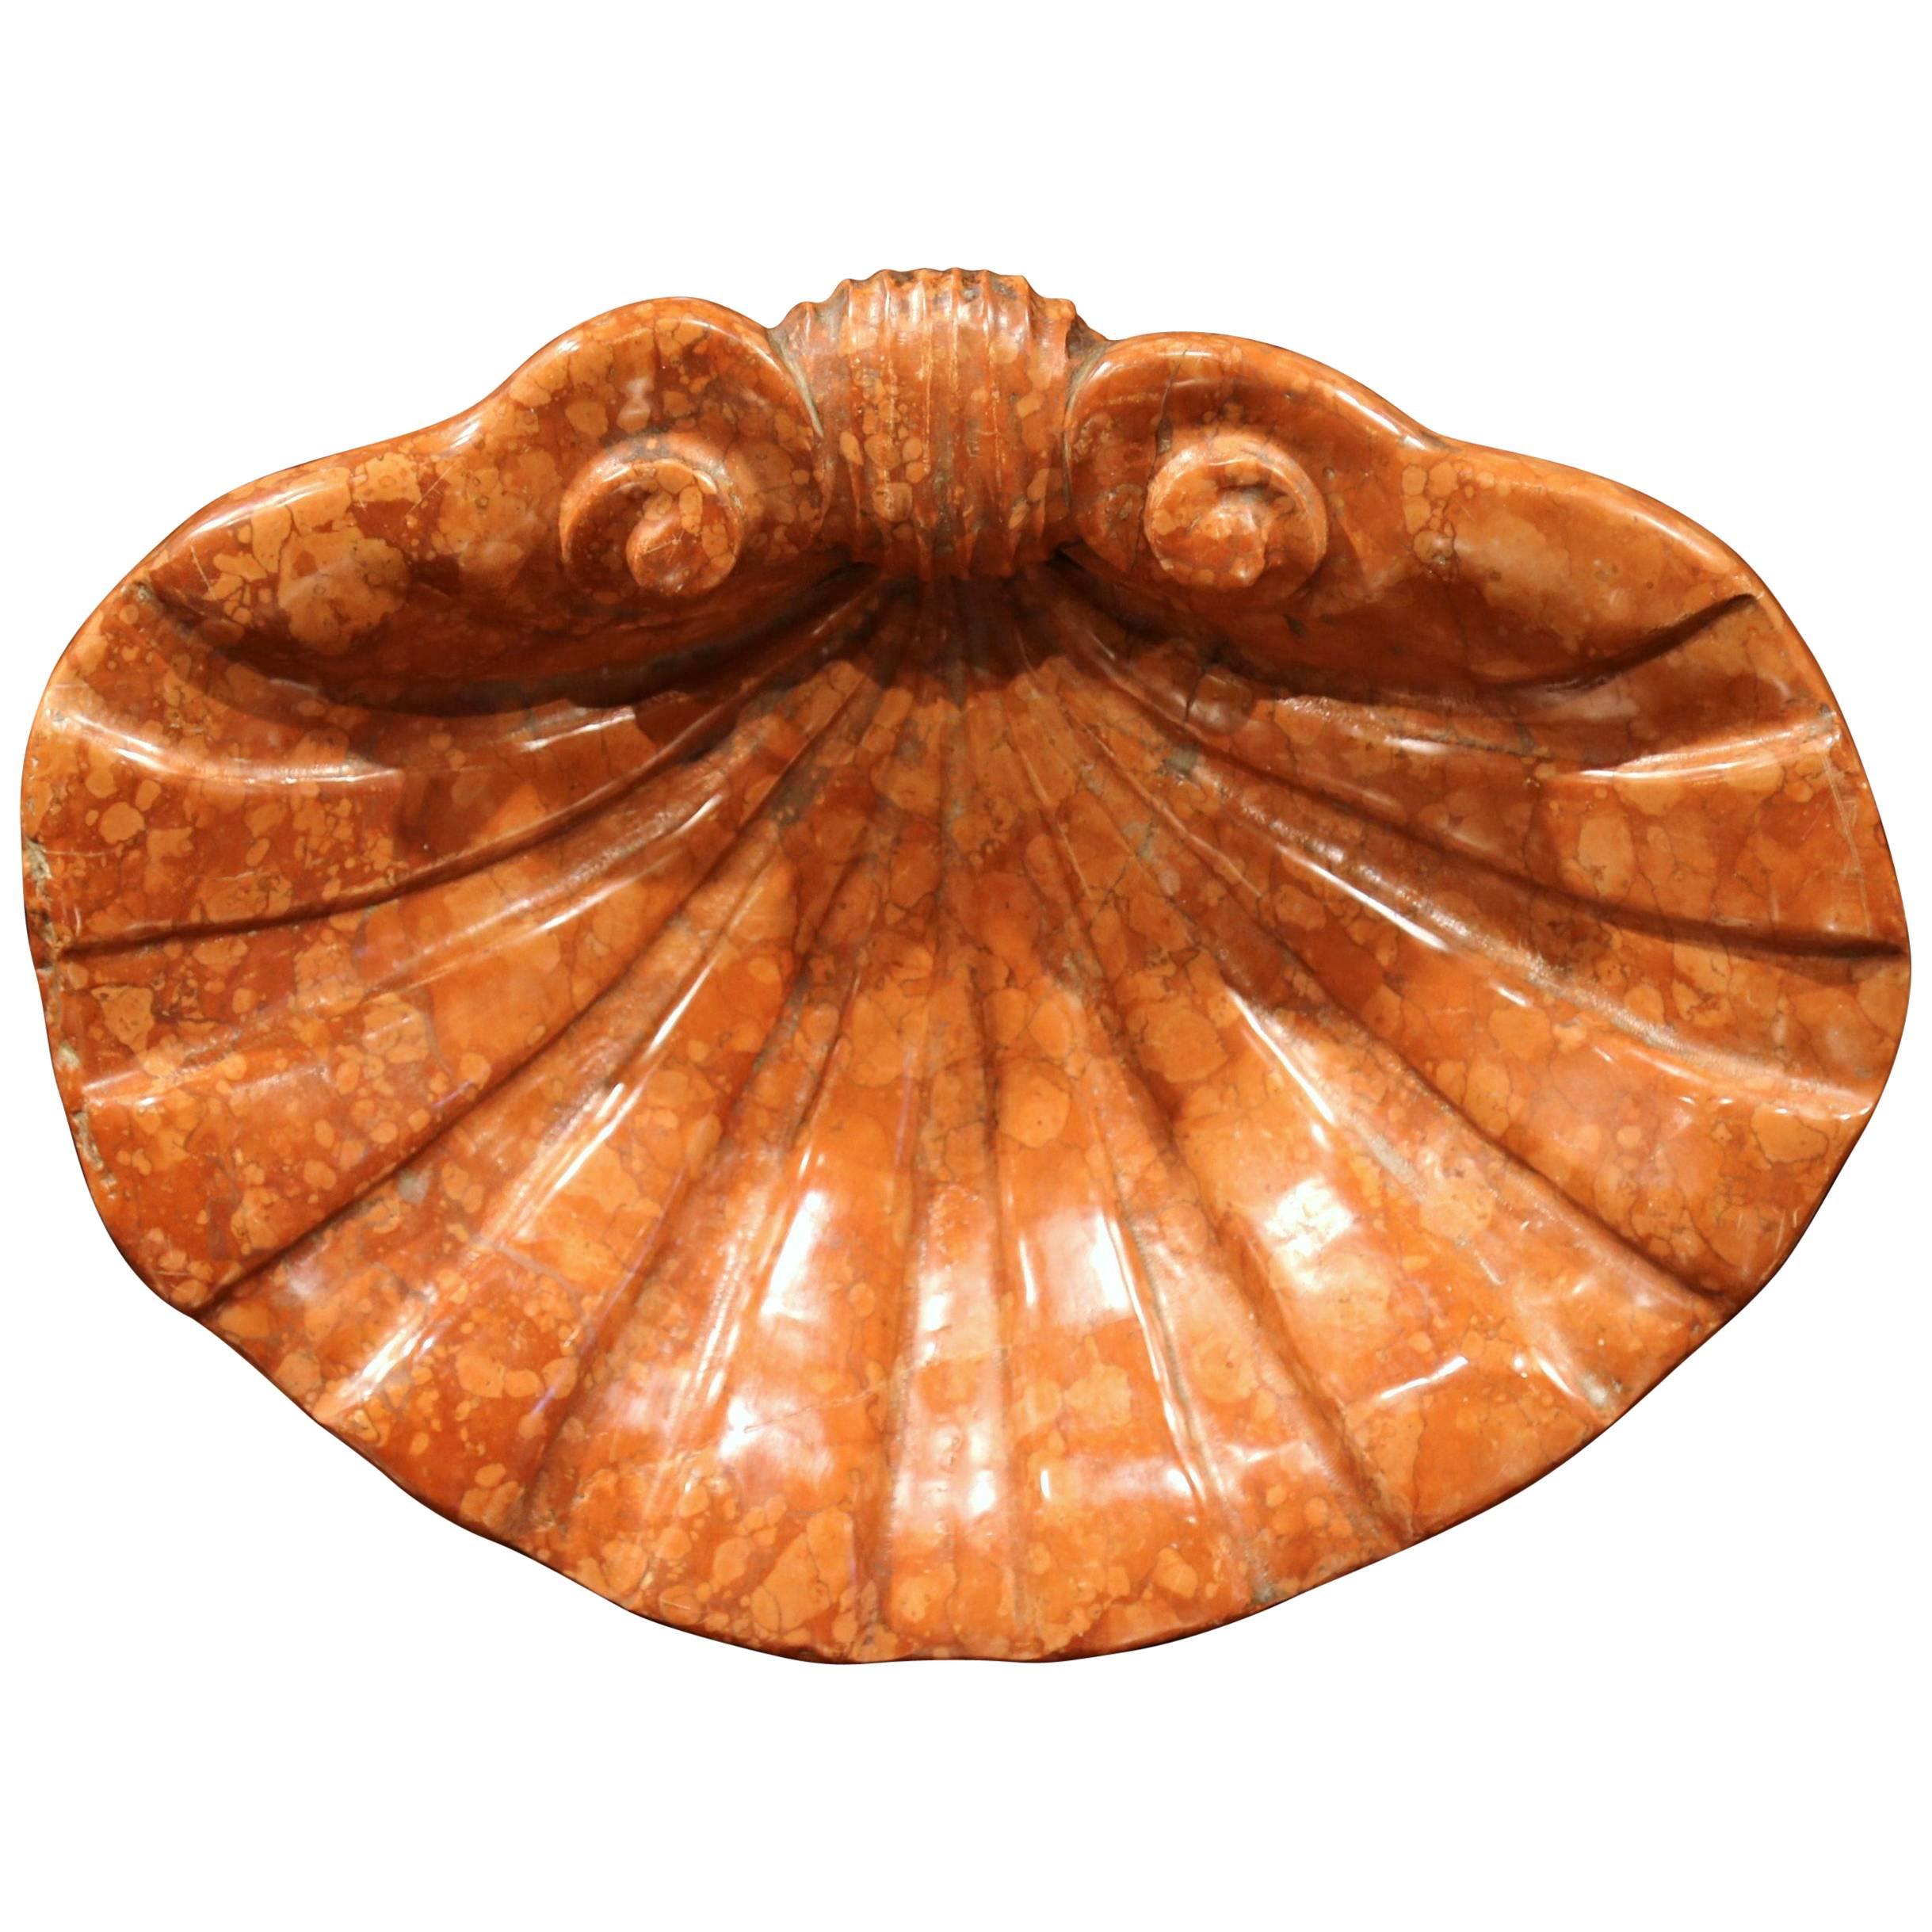 This beautiful and large carved marble stoup was crafted in France, circa 1750. Found in a small church, the antique red stone basin is carved in the shape of a large seashell with an elegant demilune shape. The Classic, decorative marble piece is